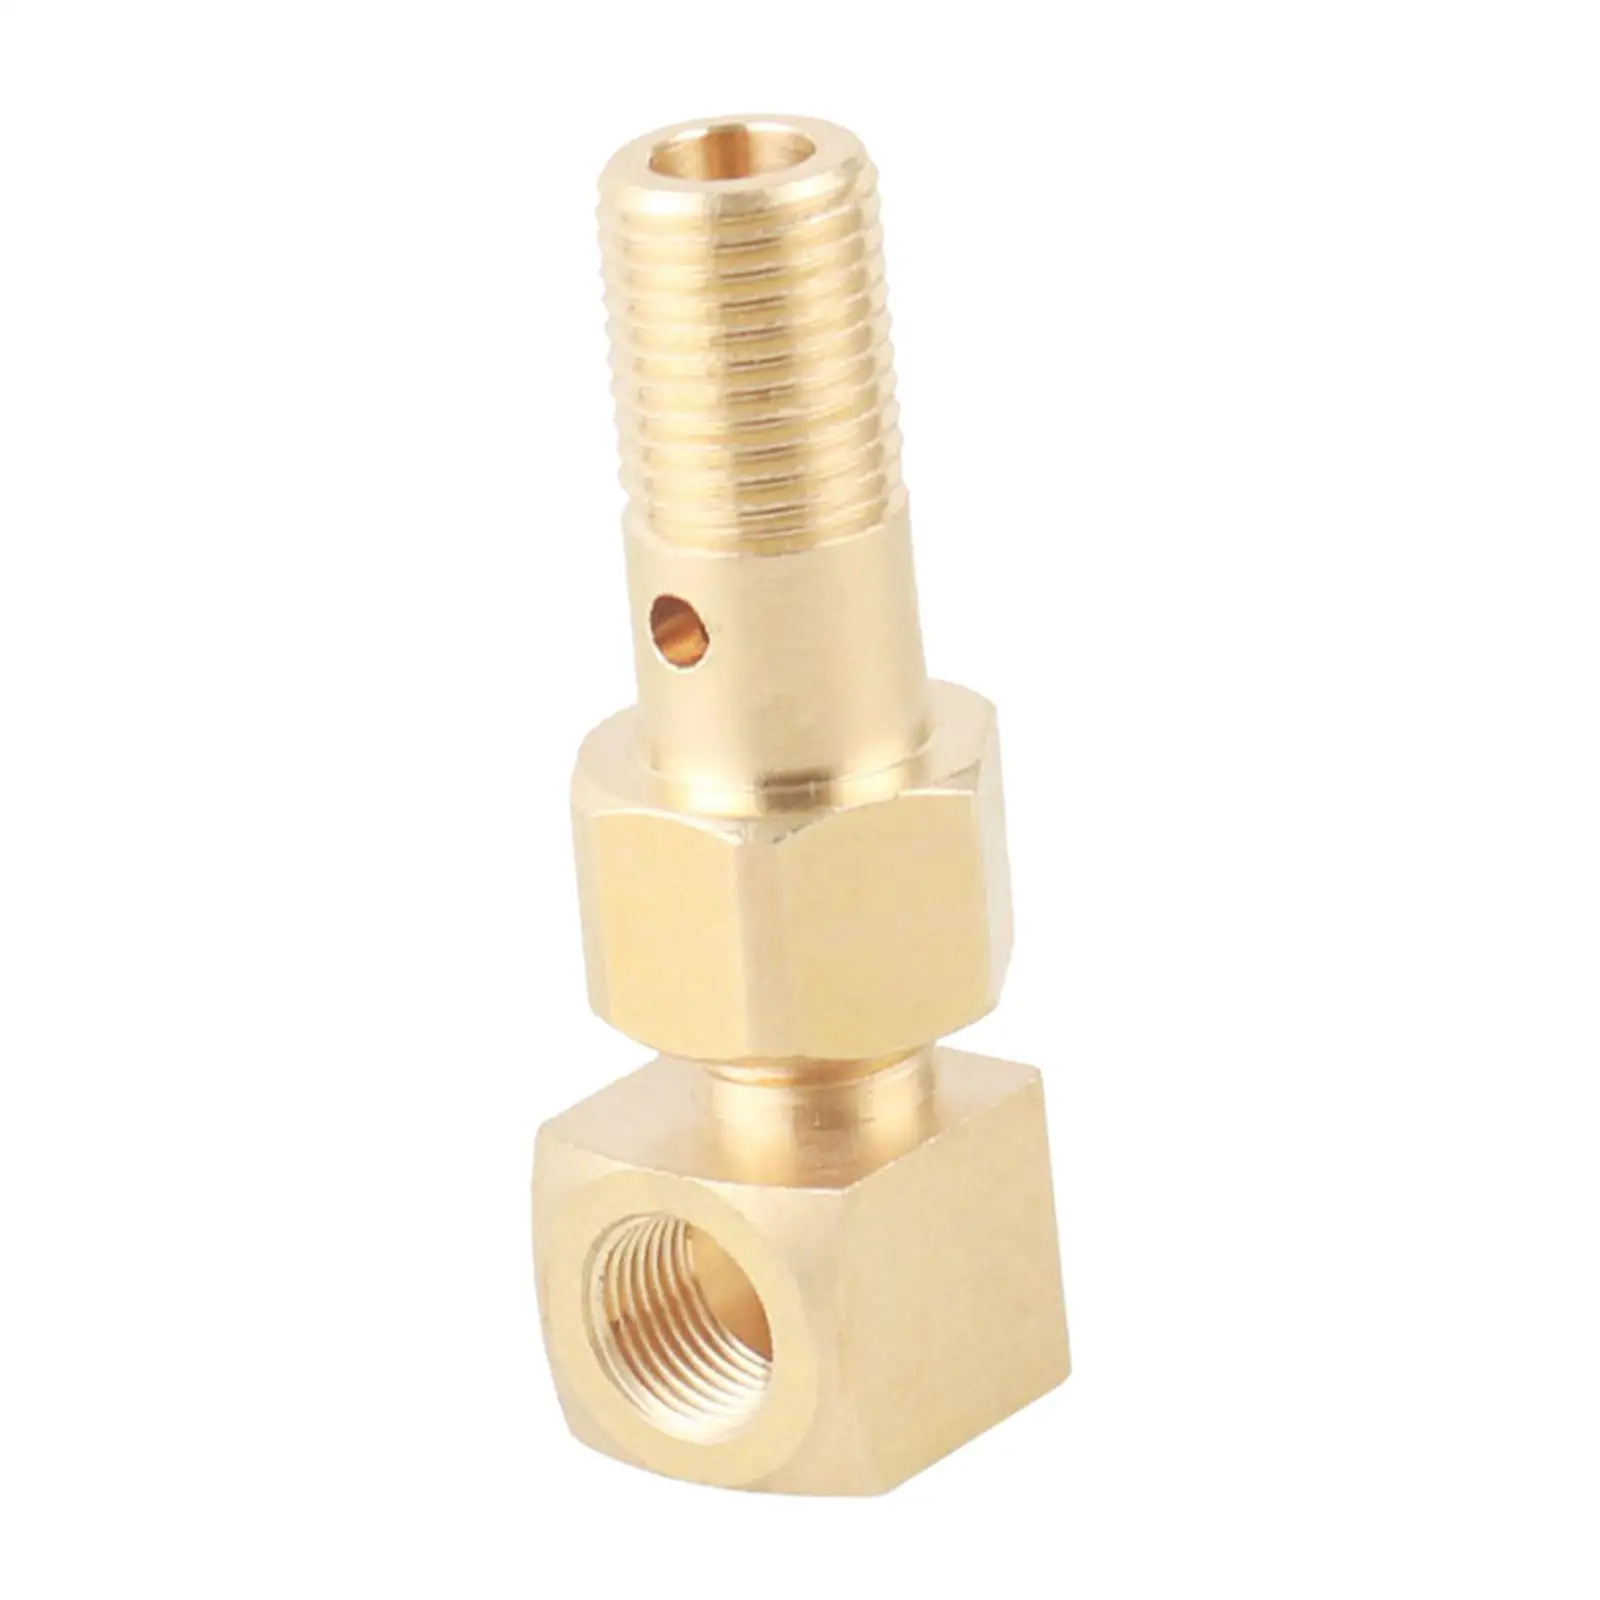 M12 x 1.25 to 1/8-27 NPT Fittings Tool Heavy Duty Accessory Fuel Pressure Banjo Bolt Thread Adapter for Del Sol 93-97